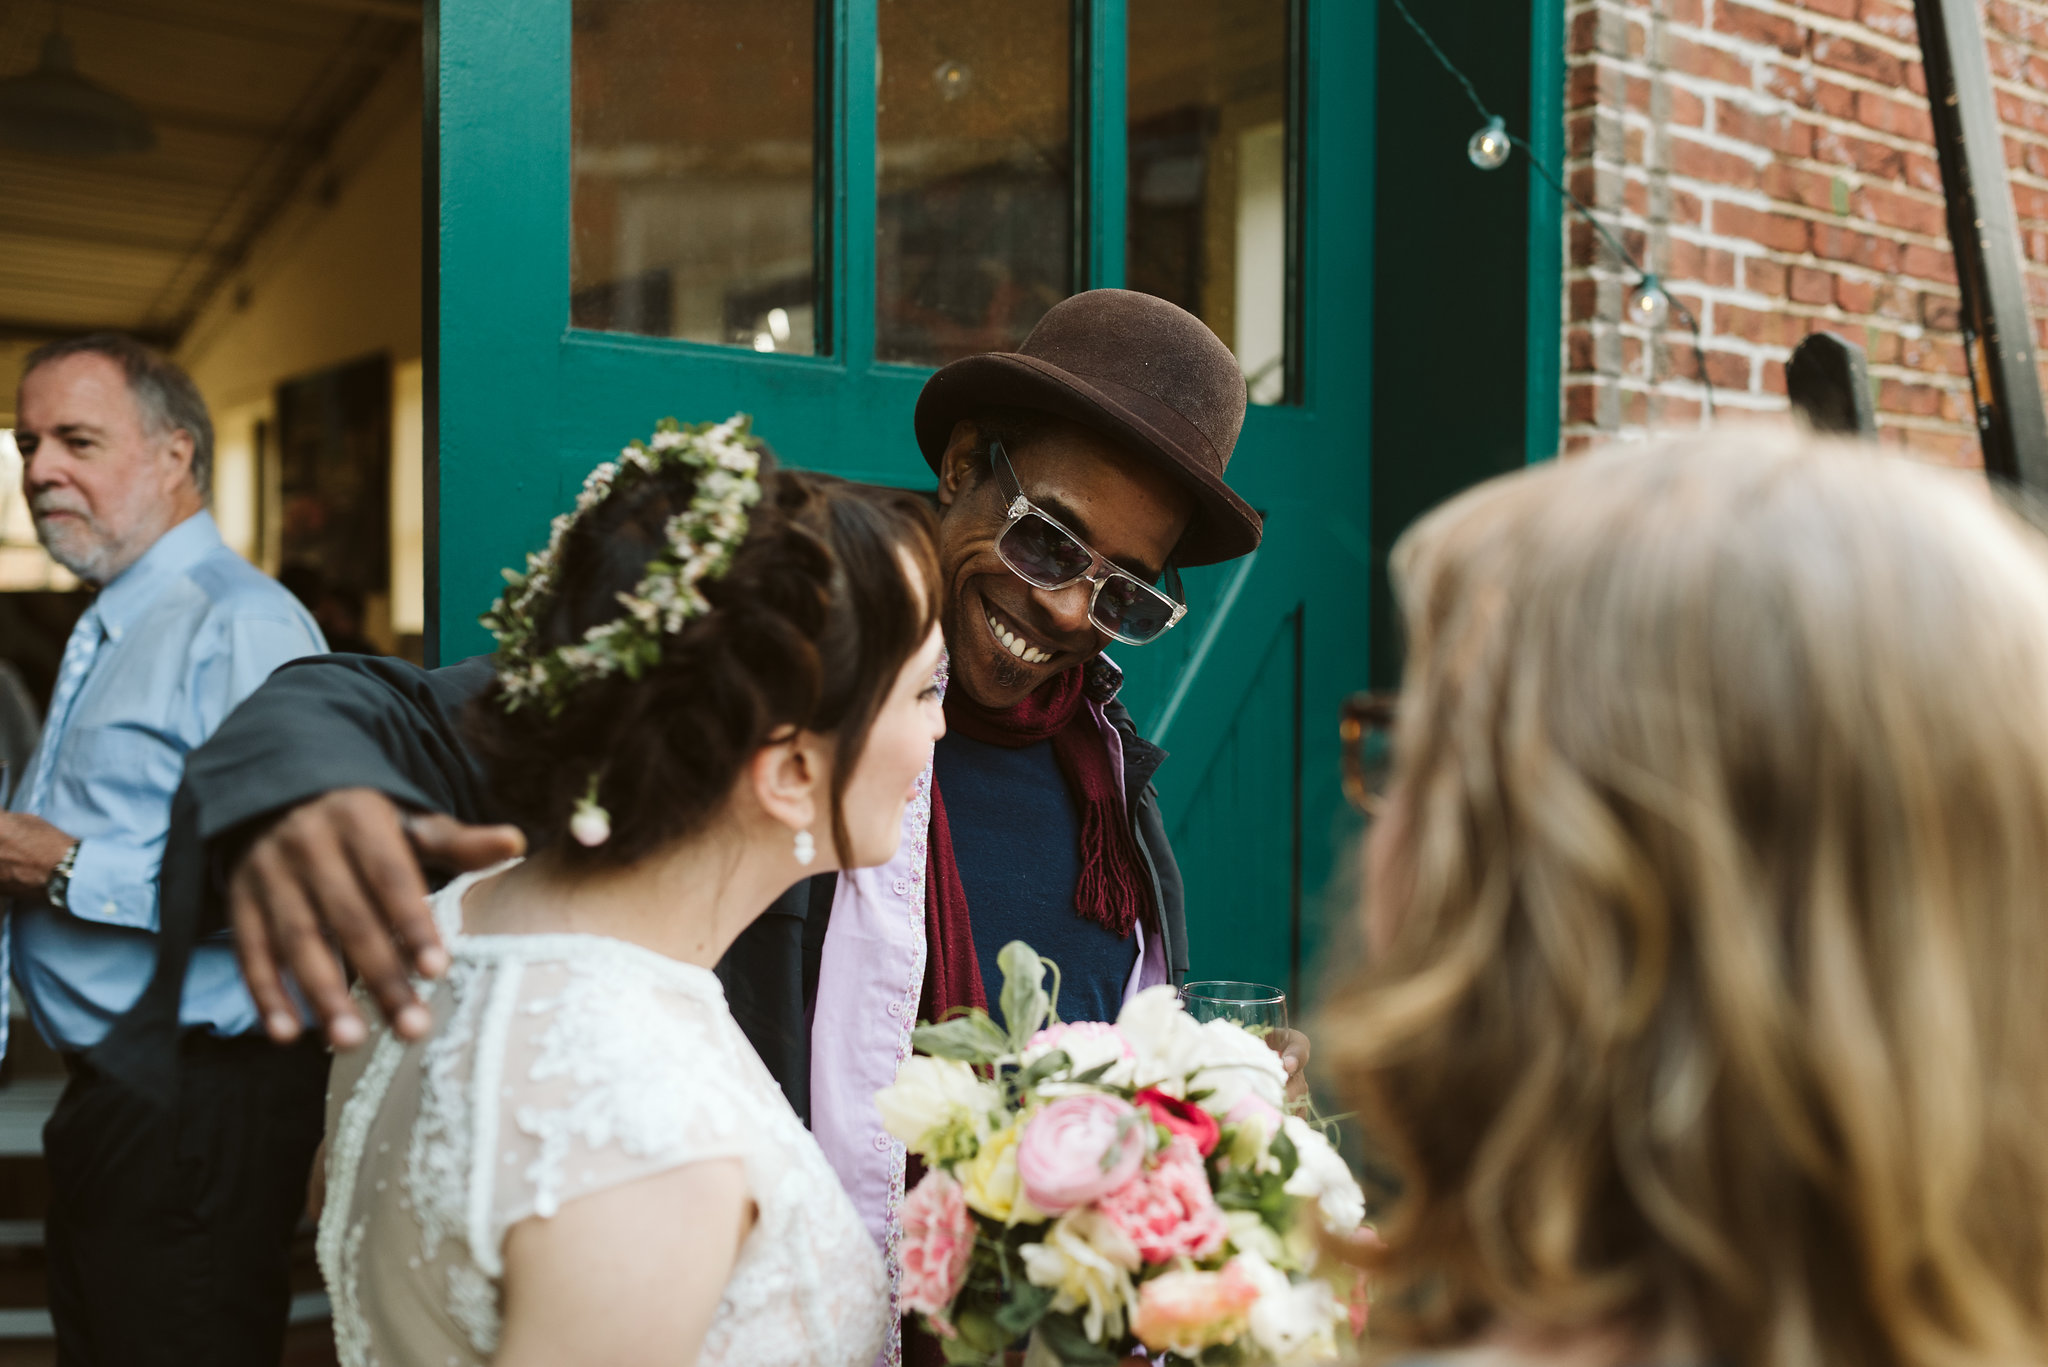  Baltimore, Maryland Wedding Photographer, Hampden, Eco-Friendly, Green, The Elm, Simple and Classic, Vintage, Friends Congratulating Bride, Flower Crown 